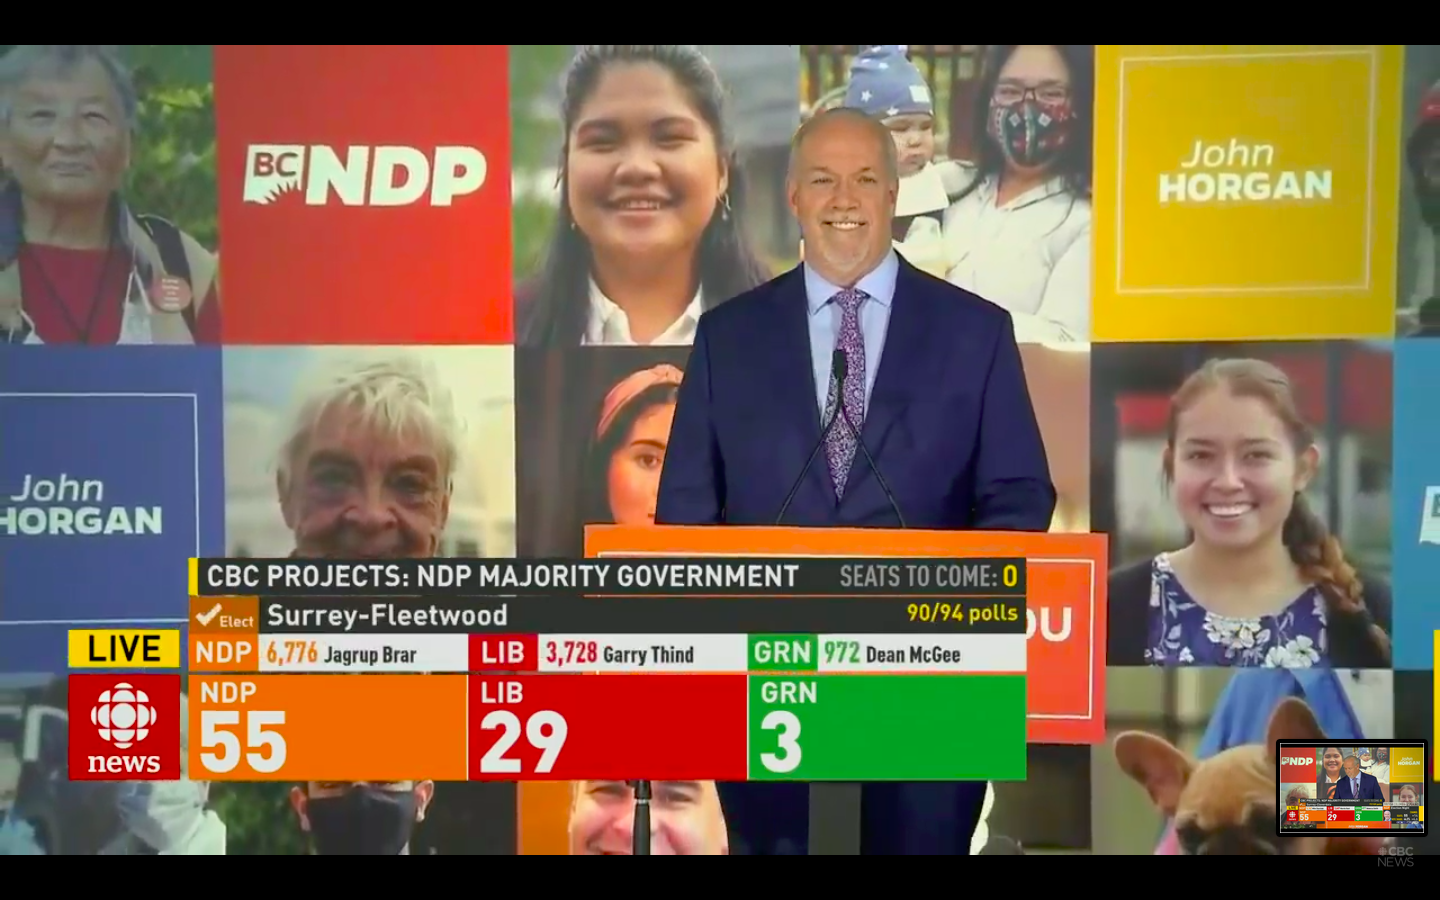 John Horgan gives victory speech after snap election